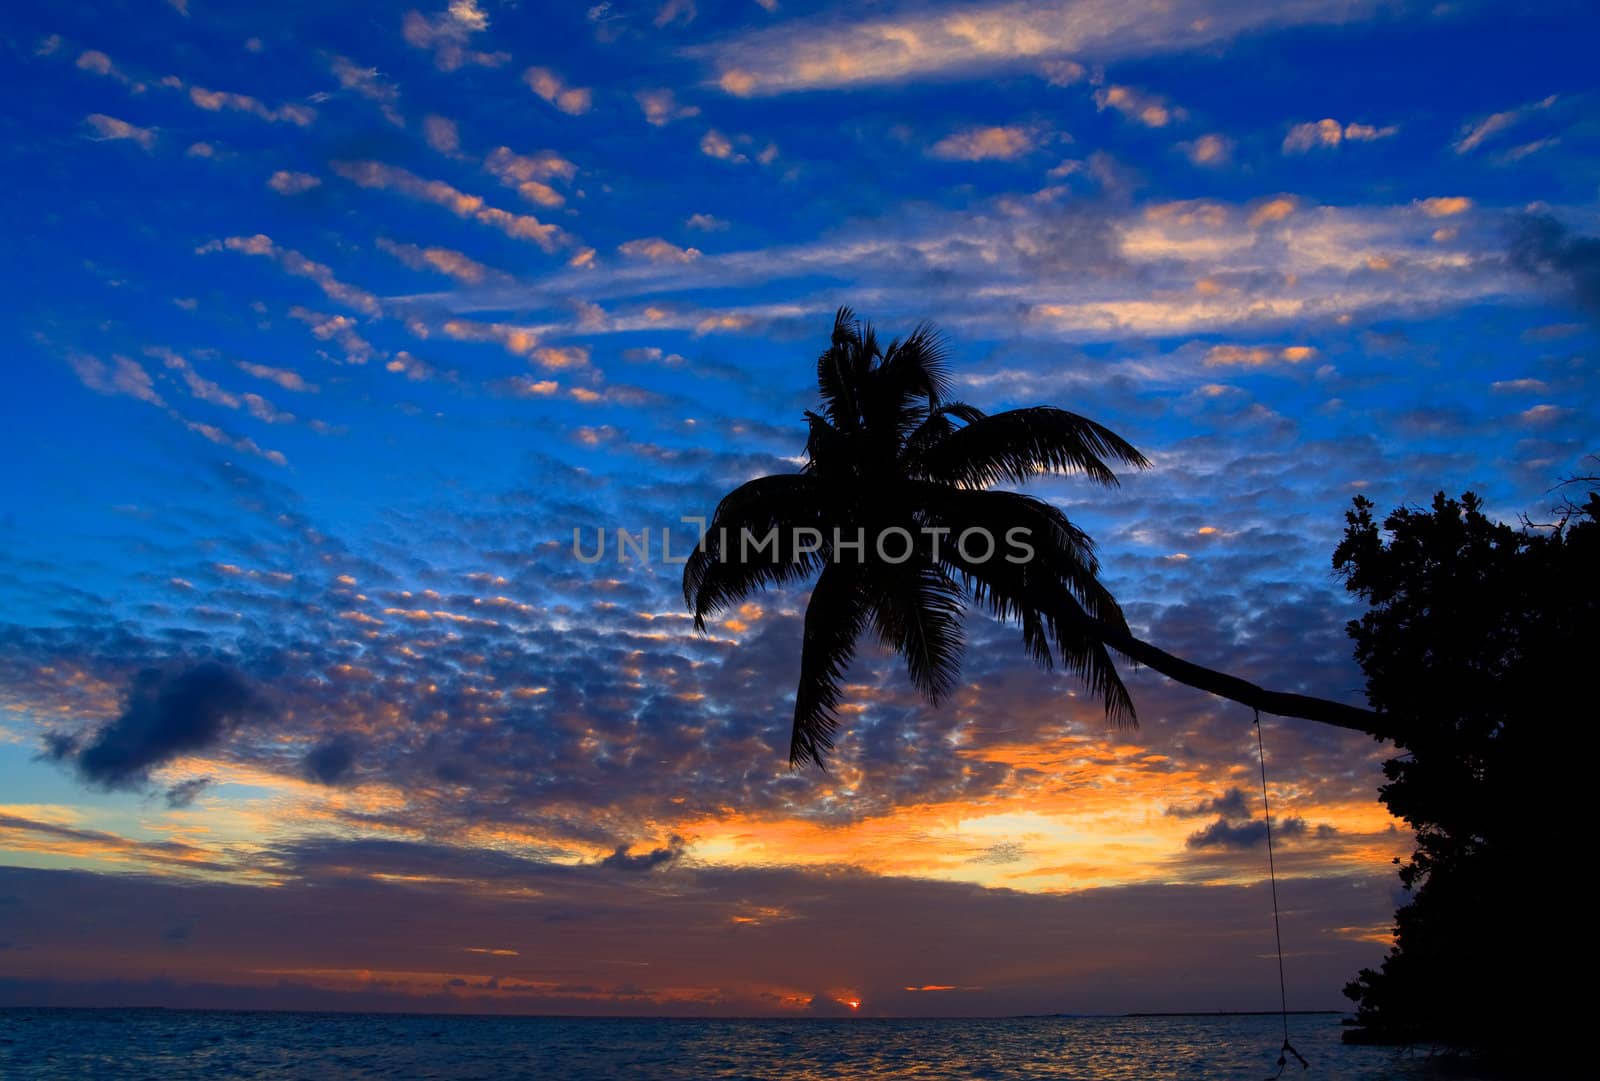 Maldivian Sunset image with nice color